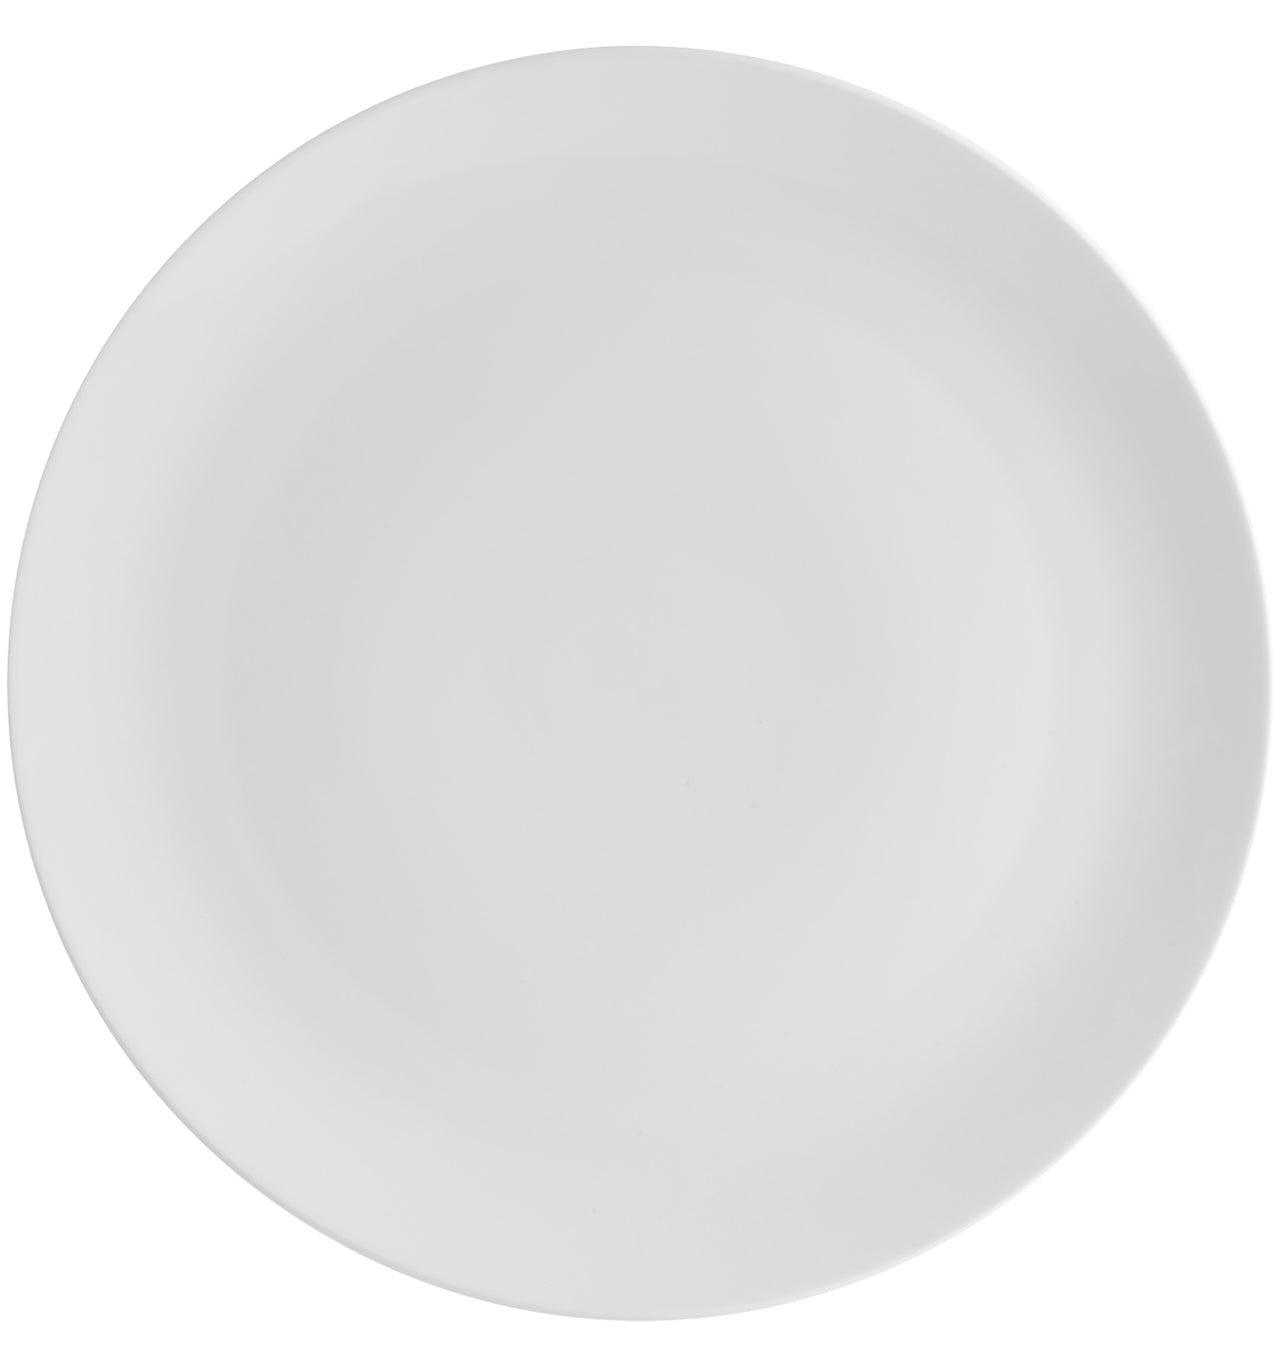 Broadway White - Charger Plate (4 plates) - LAZADO